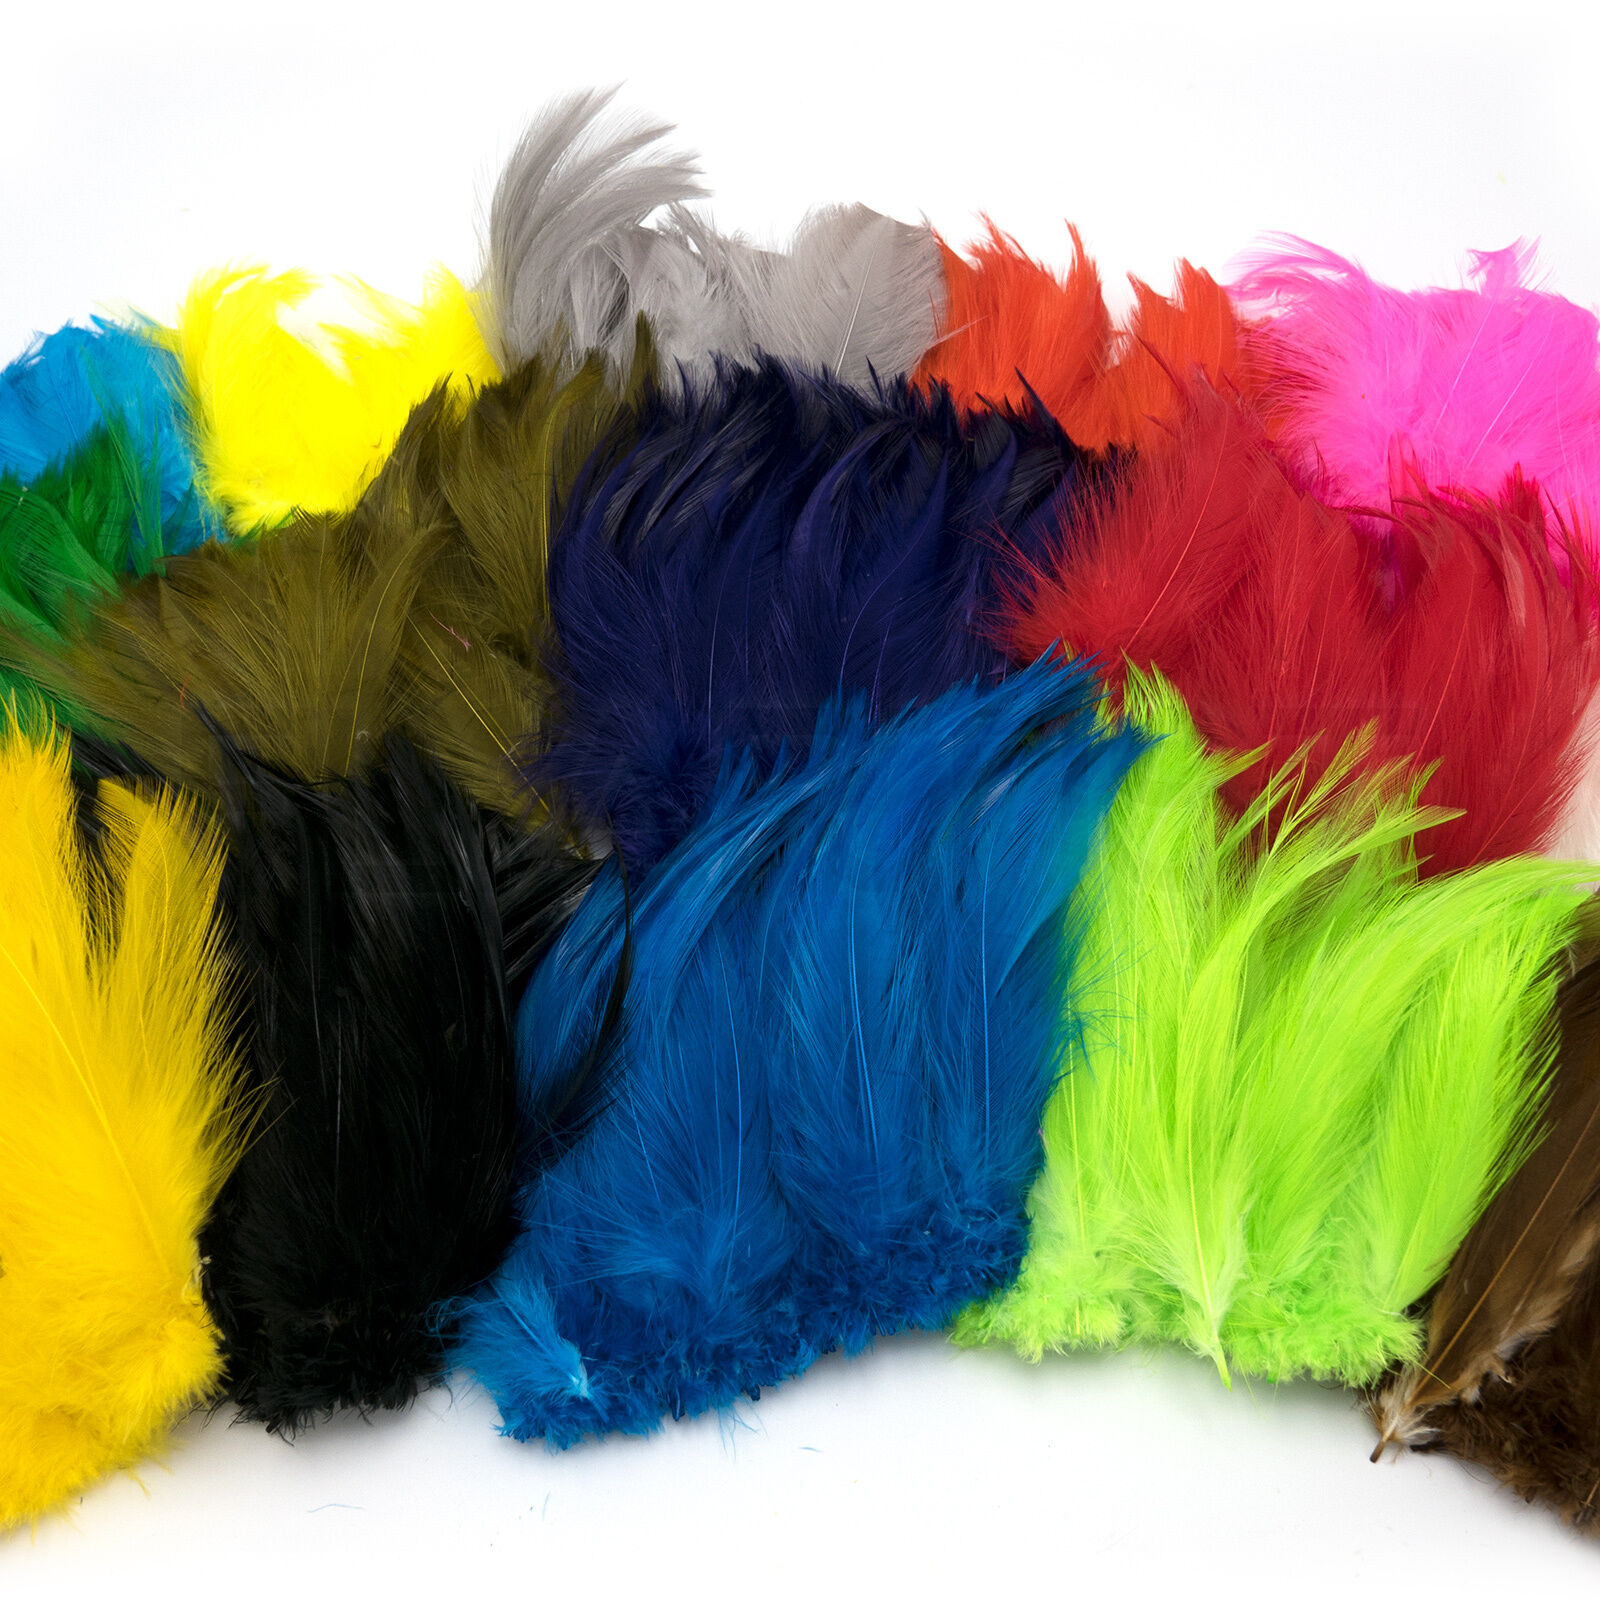 Saltwater Neck Hackle - Hareline 5-6" Strung Fly Tying Feathers 15+ Dyed Colors!